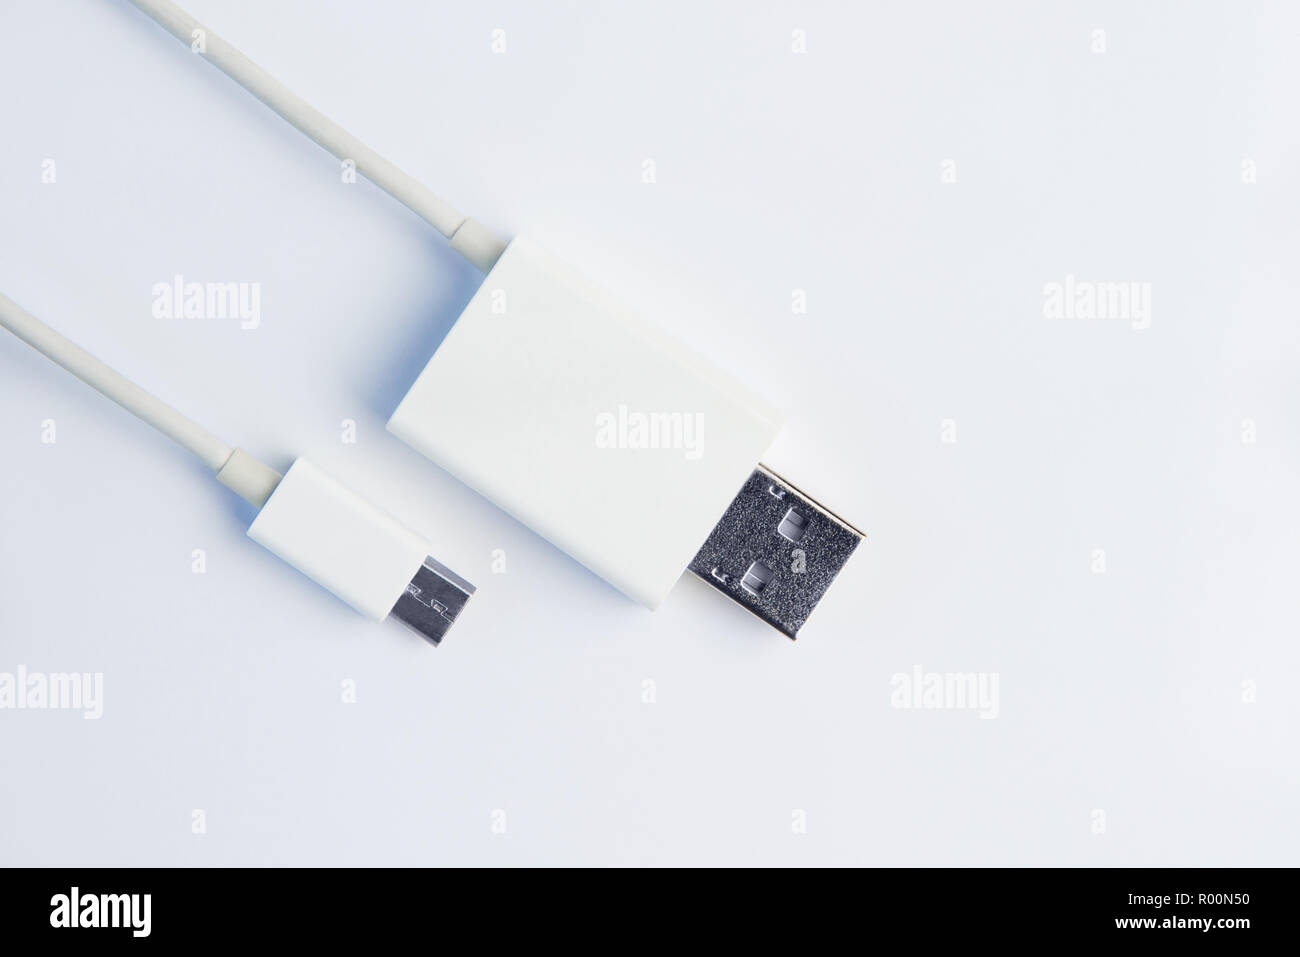 White micro USB cables on white background. Connectors and sockets for PC and mobile devices. Computer peripherals connector or recharge supply. Stock Photo